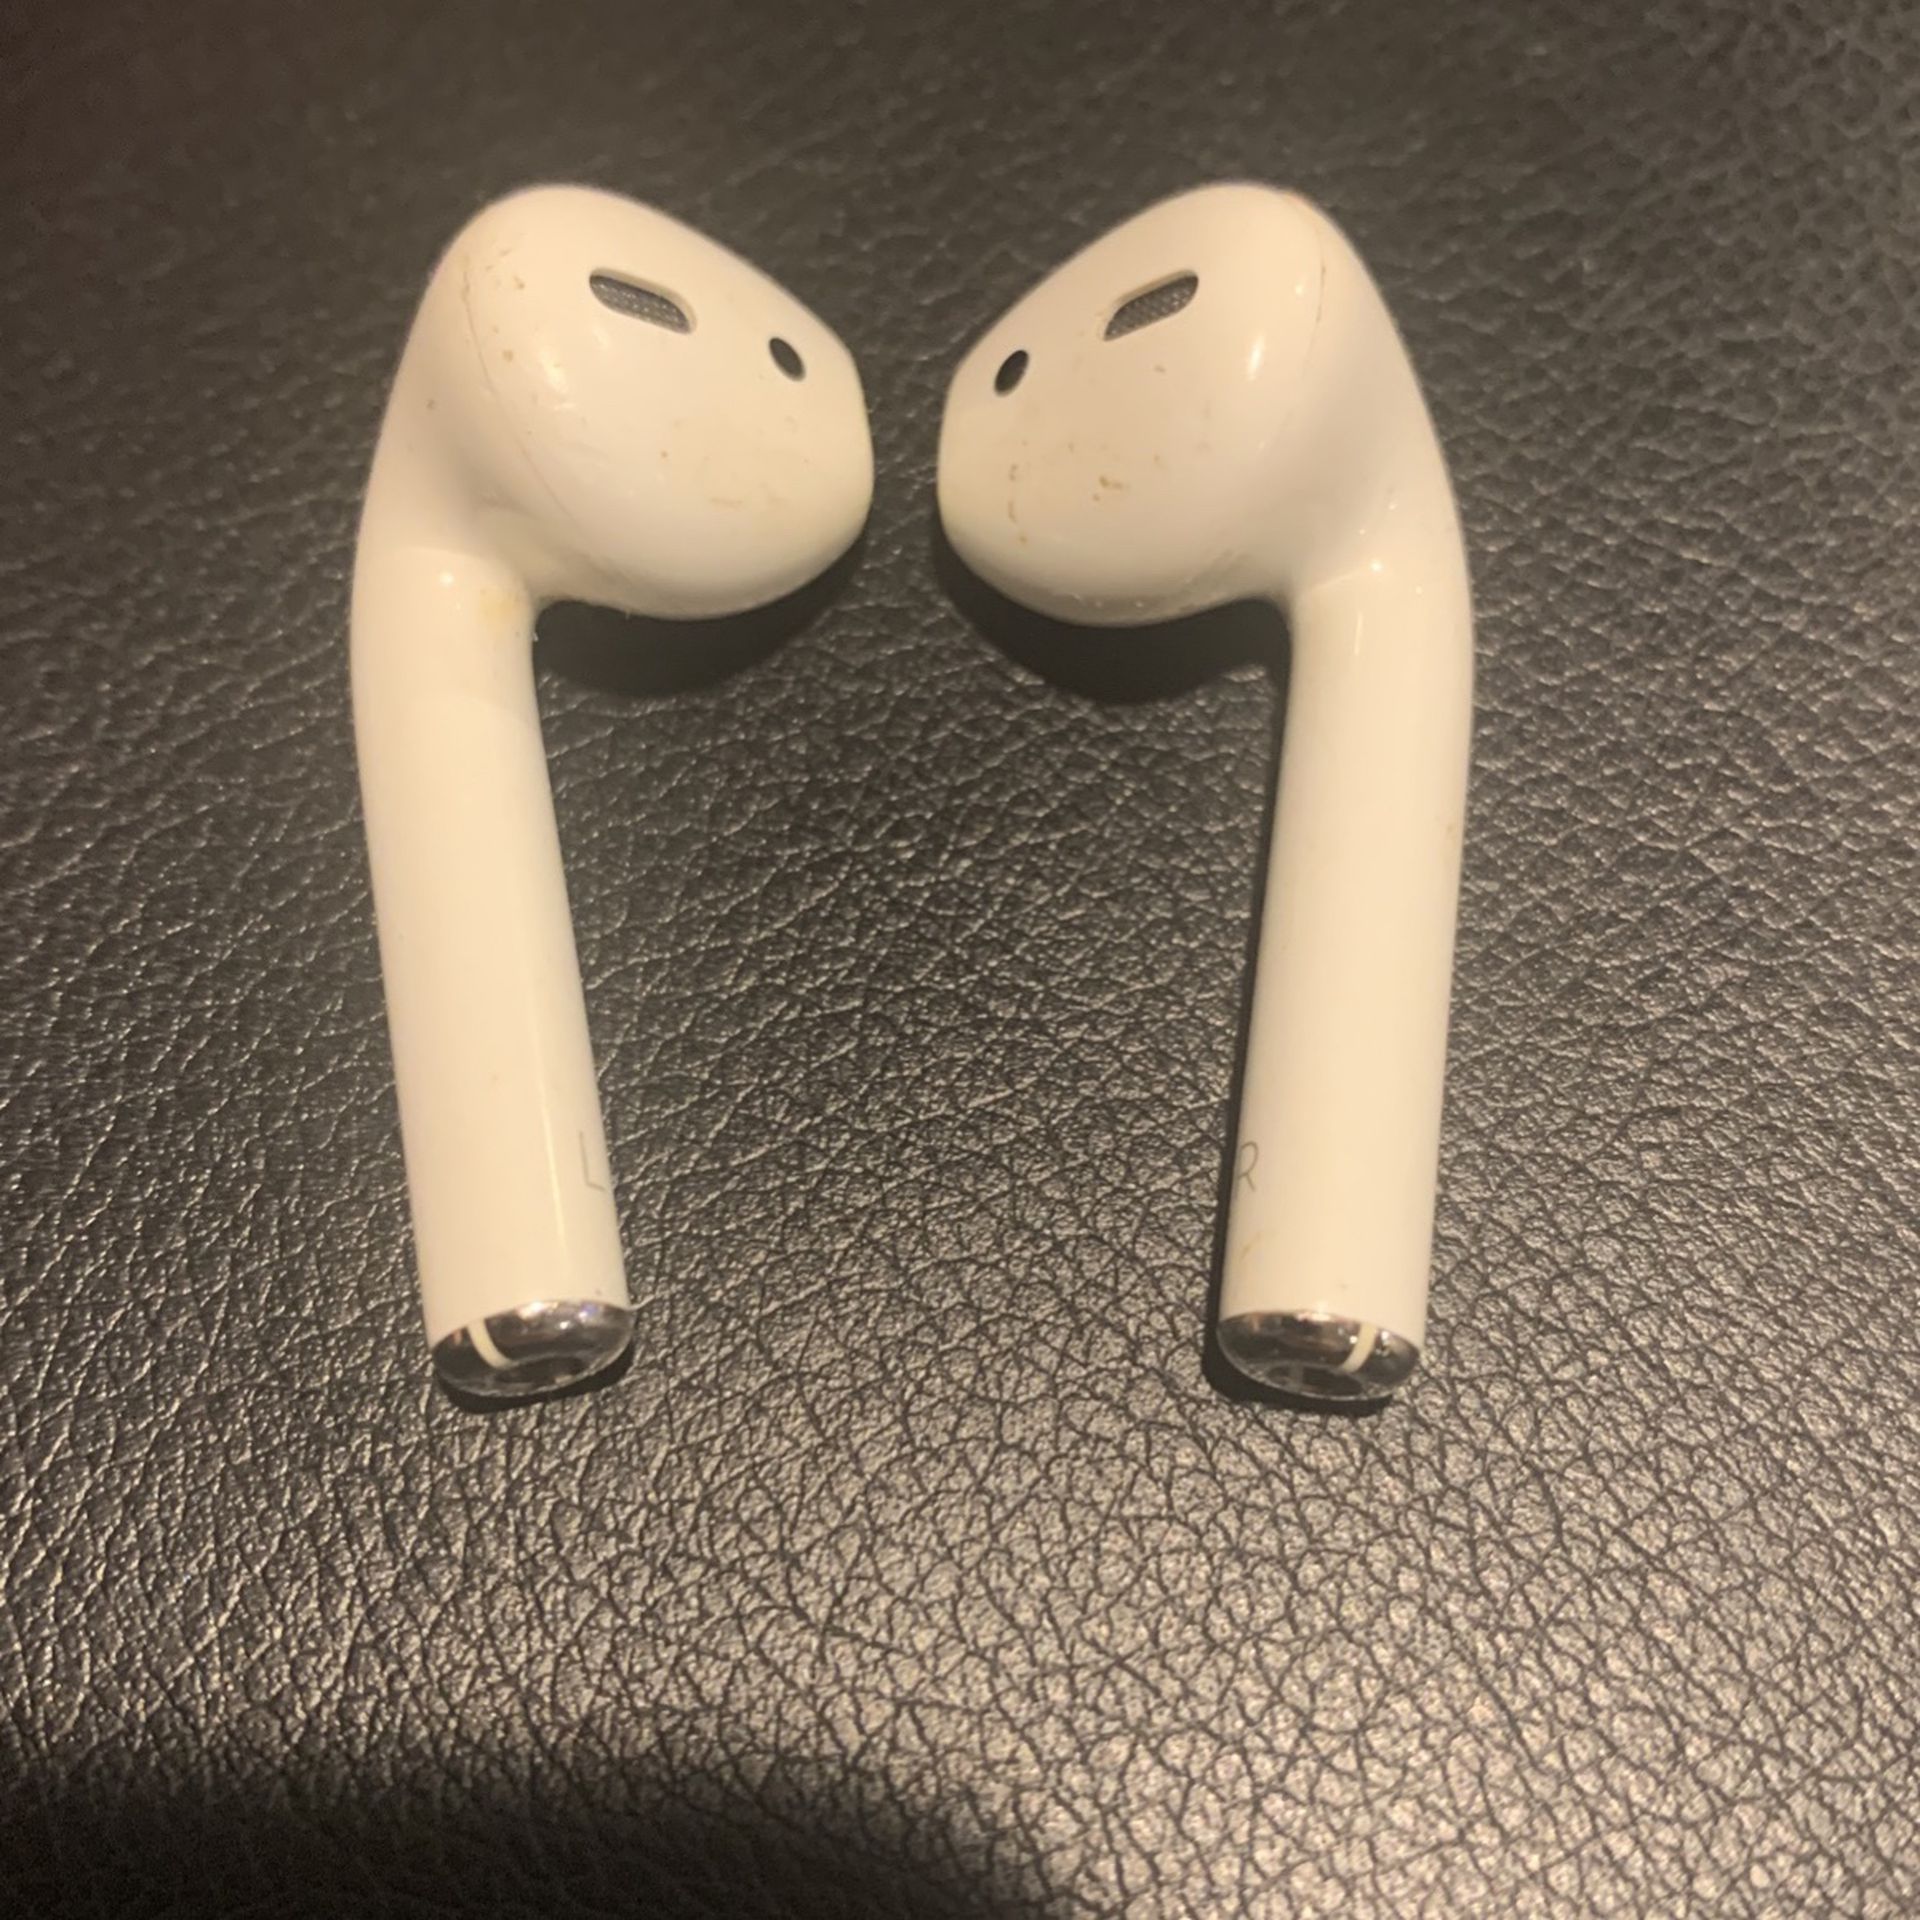 iPhone Wireless Earbuds Barely Used (Buds Only No Charger Case)